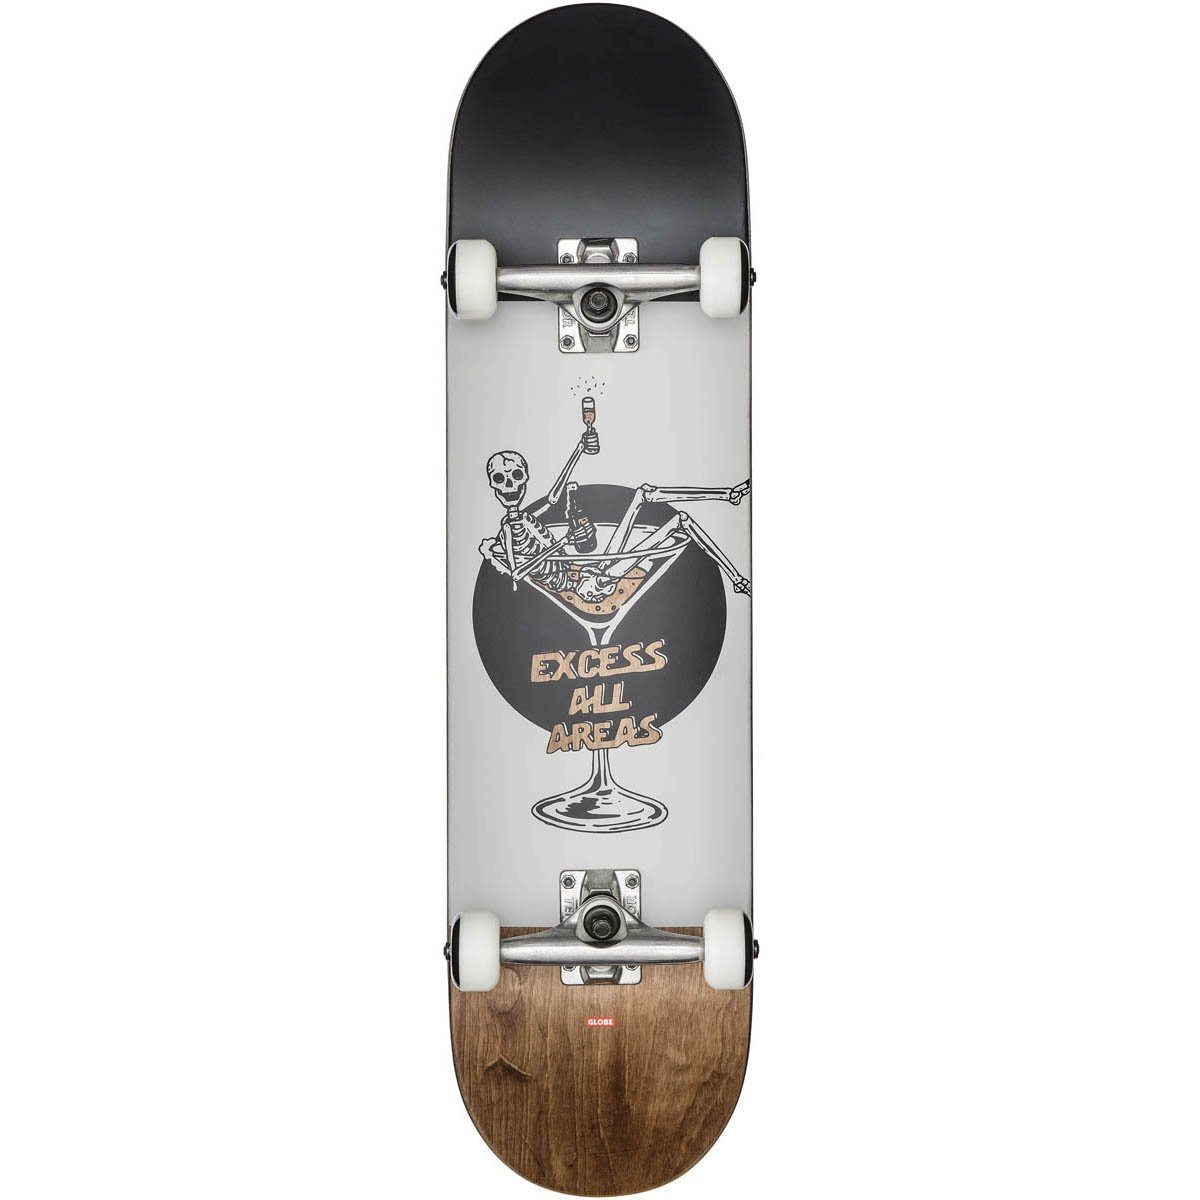 G1 Excess 8.0 Skateboard Complete